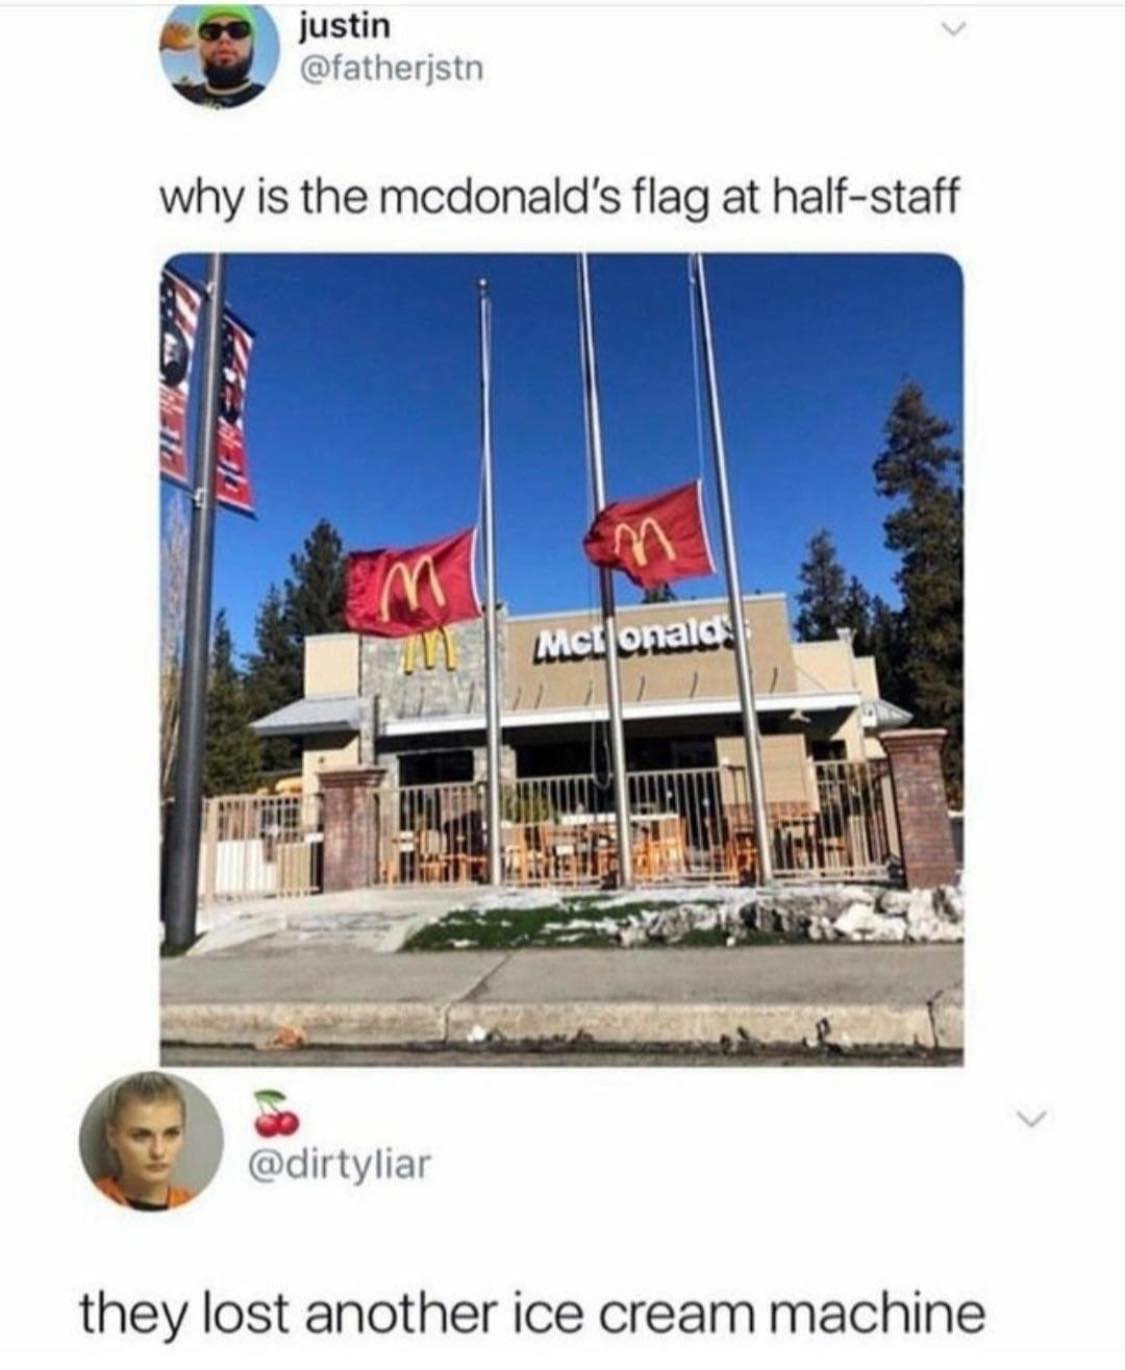 mcdonalds flags half staff - justin why is the mcdonald's flag at halfstaff Mct onald they lost another ice cream machine